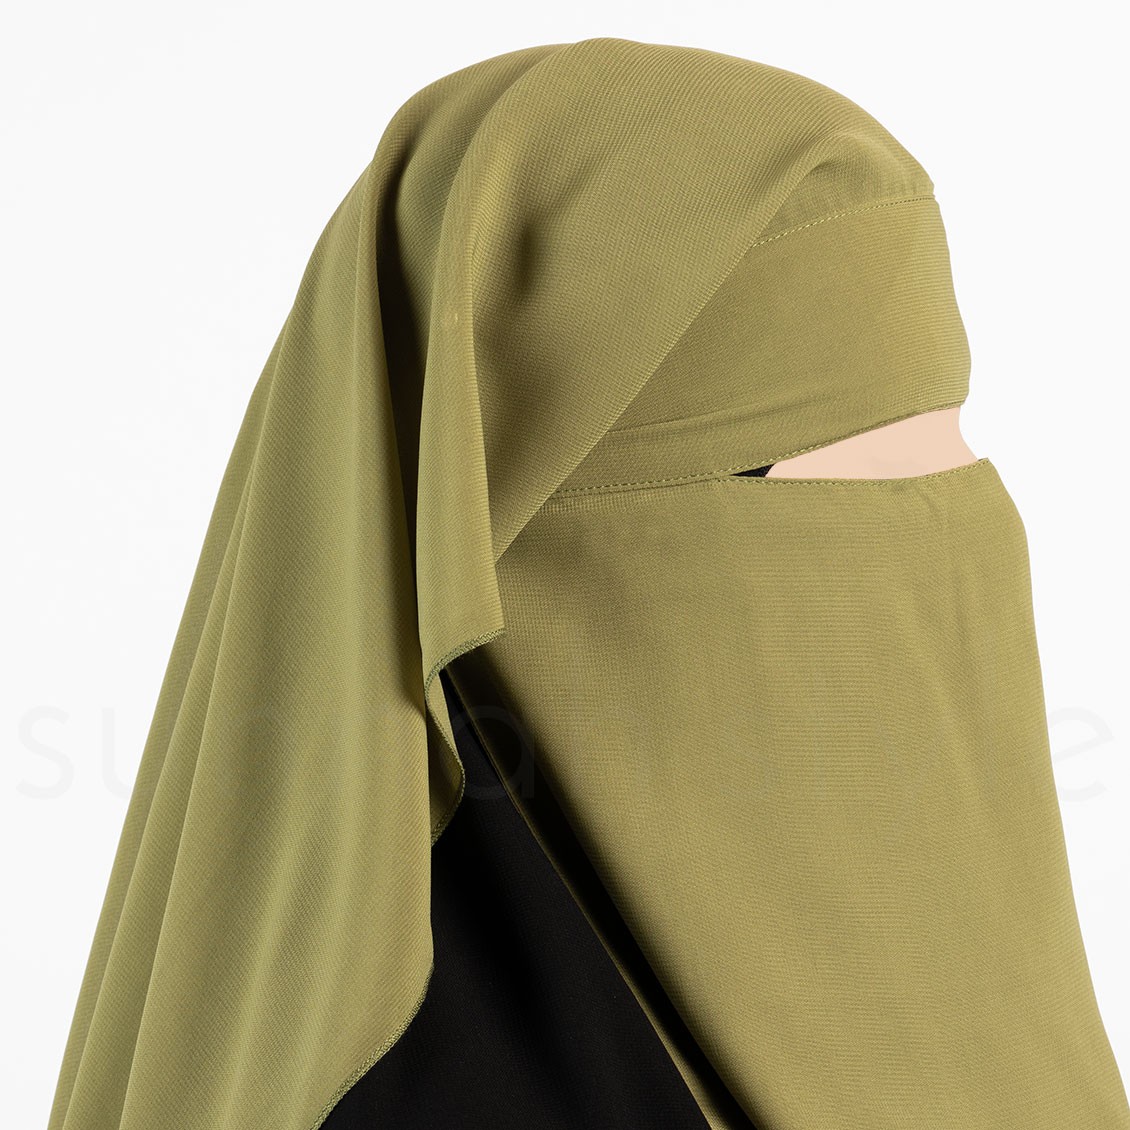 Sunnah Style Two Layer Niqab Moss